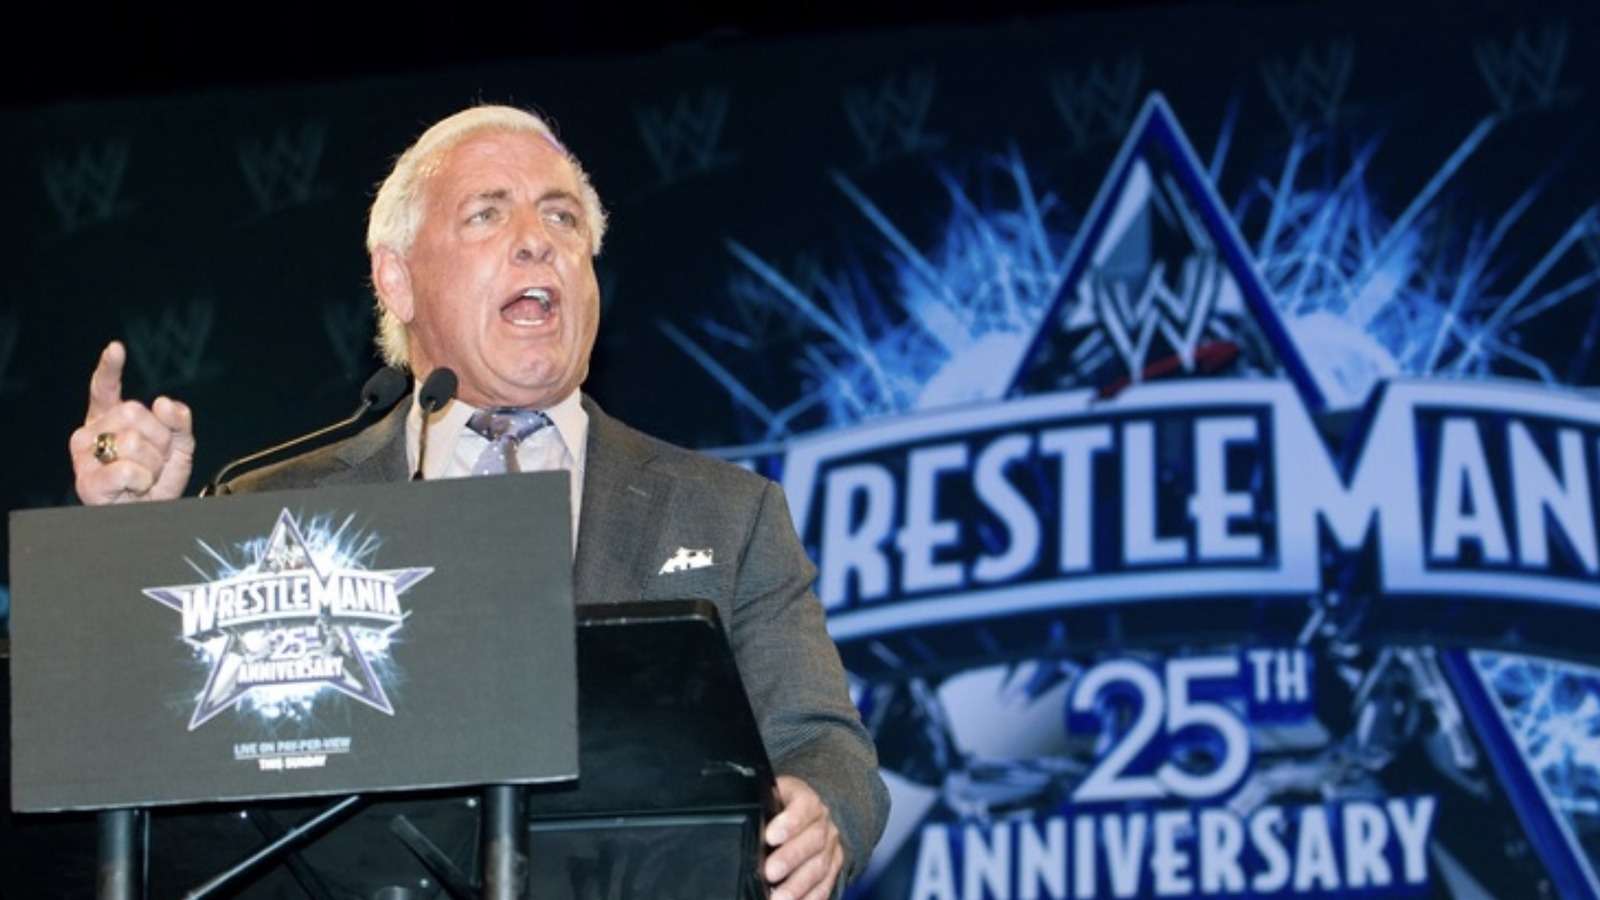 Ric Flair is currently under contract with AEW, but could the “Nature Boy” return to the WWE?